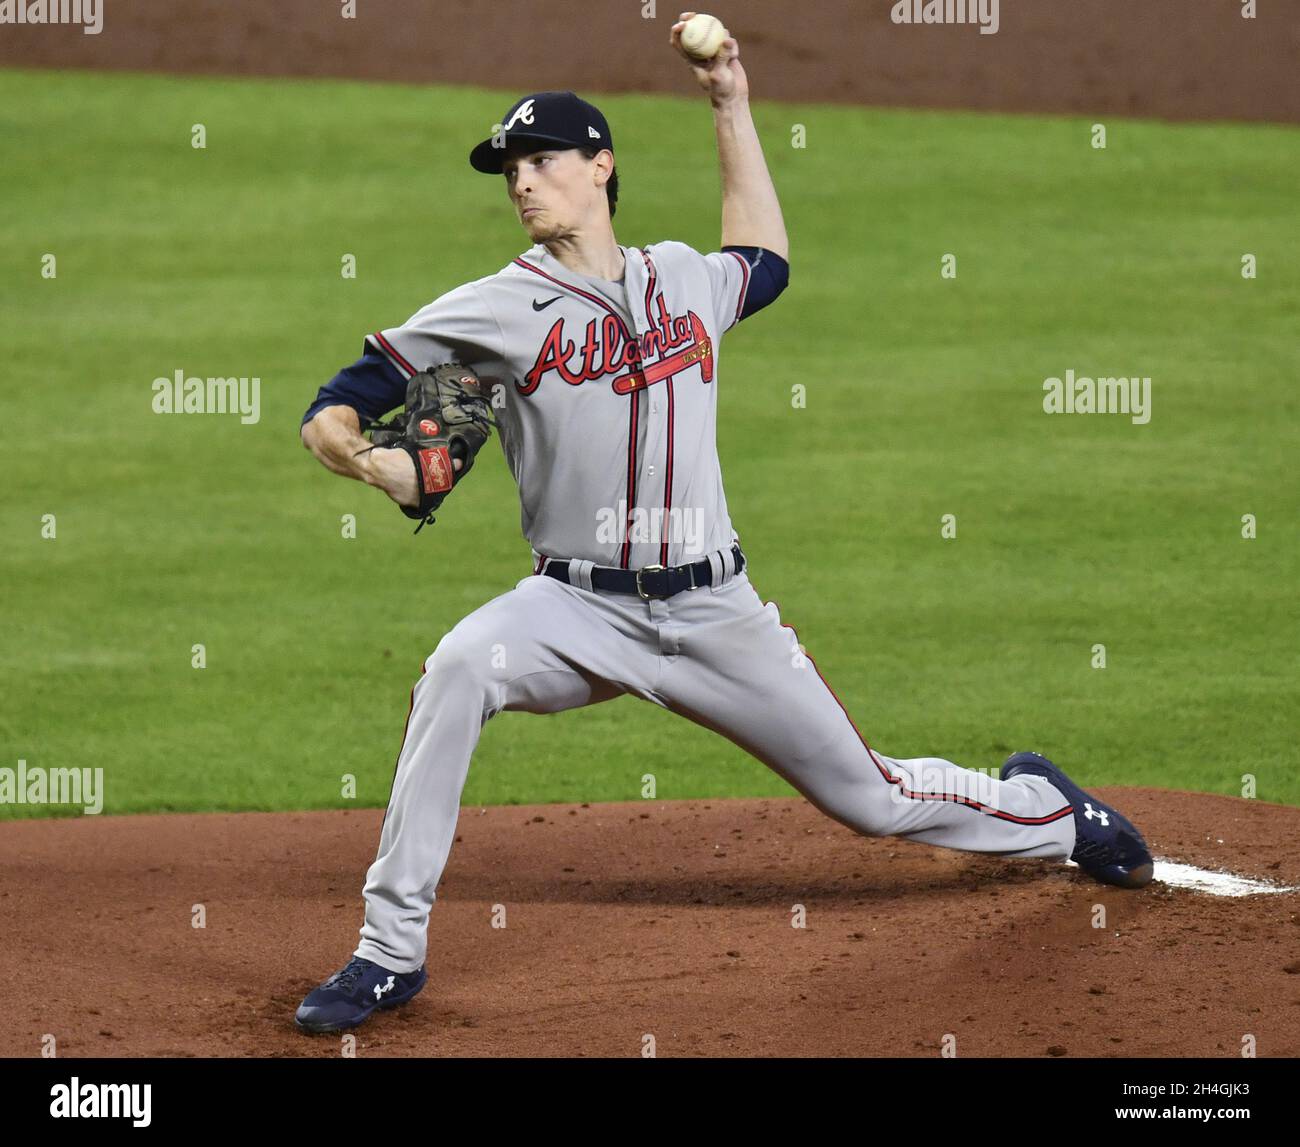 Houston, United States. 02nd Nov, 2021. Atlanta Braves starter Max Fried throws against the Houston Astros during the first inning in game six in the MLB World Series at Minute Maid Park on Tuesday, November 2, 2021 in Houston, Texas. Houston returns home facing elimination trailing Atlanta 3-2 in the series. Photo by Maria Lysaker/UPI Credit: UPI/Alamy Live News Stock Photo